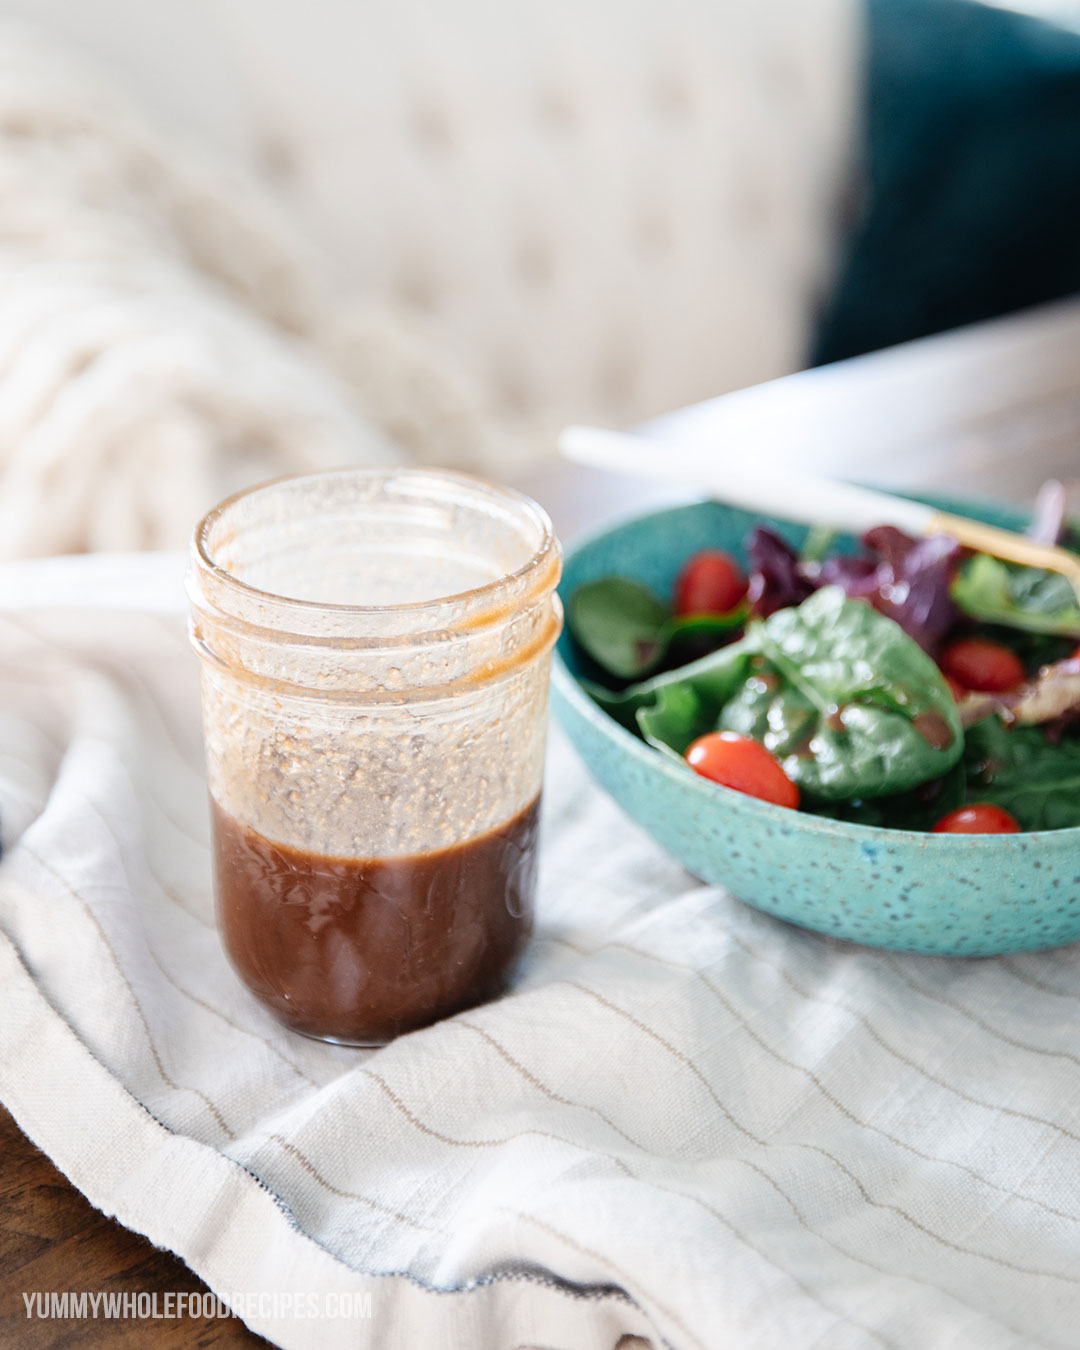 How to make simple balsamic dressing